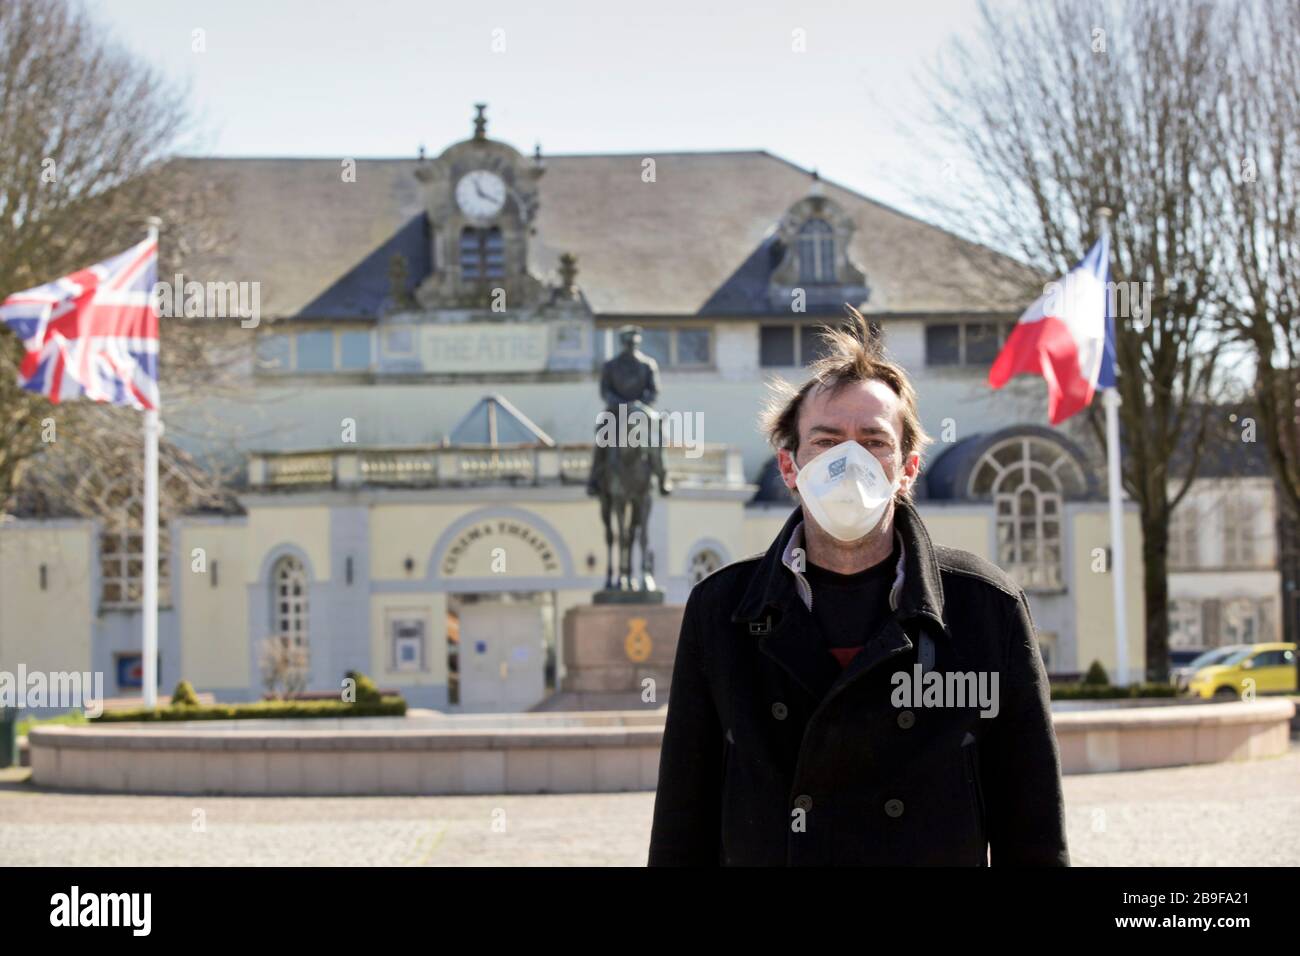 23 March 2020. Montreuil Sur Mer, Pas de Calais, France.  Coronavirus - COVID-19 in Northern France.  Wearing a face mask to help protect himself from Stock Photo